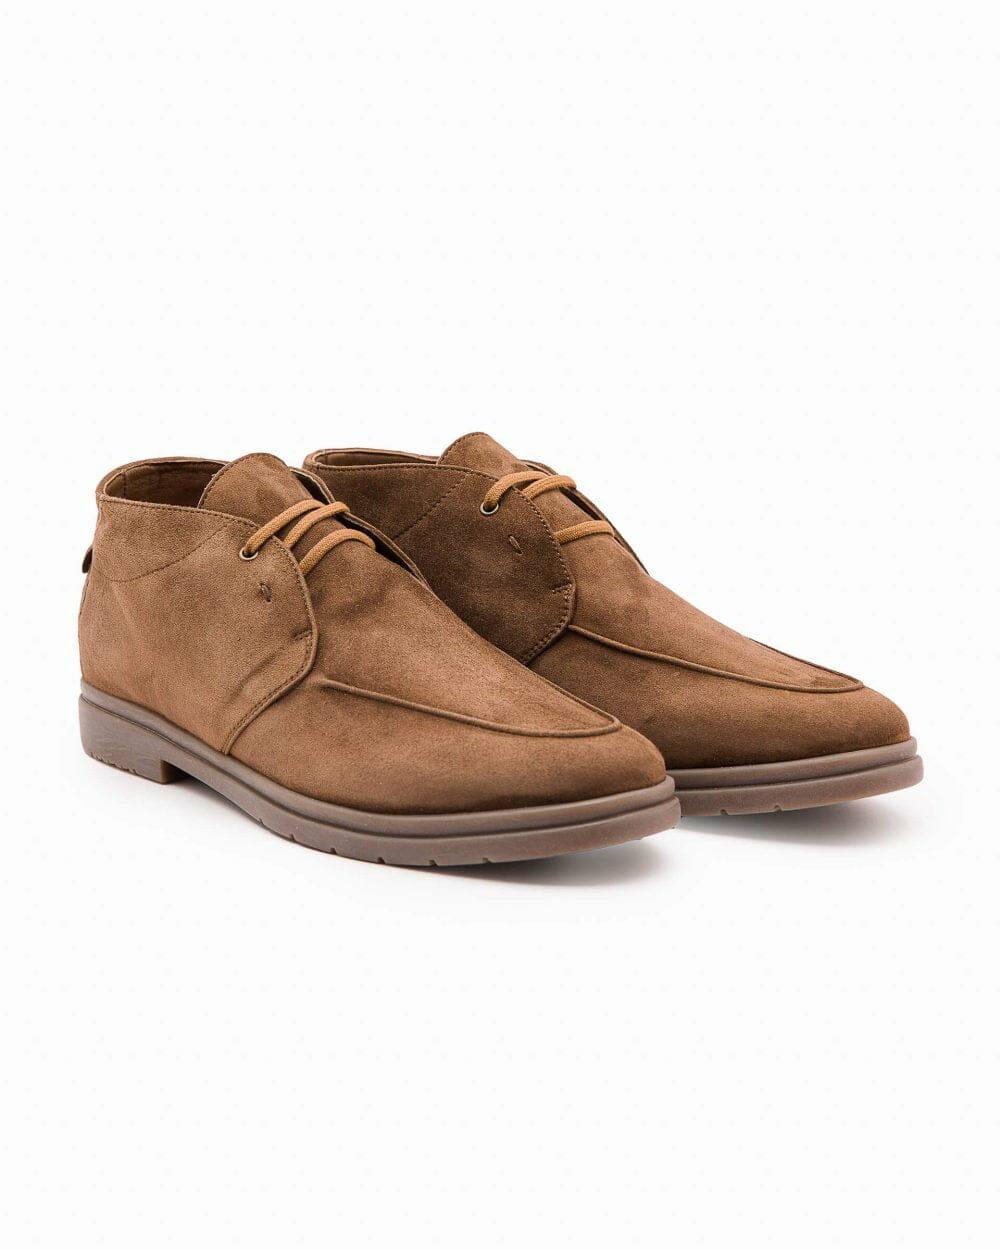 aq-panarea-double-up-pinch-sewn-suede-coffee-pair-alligned